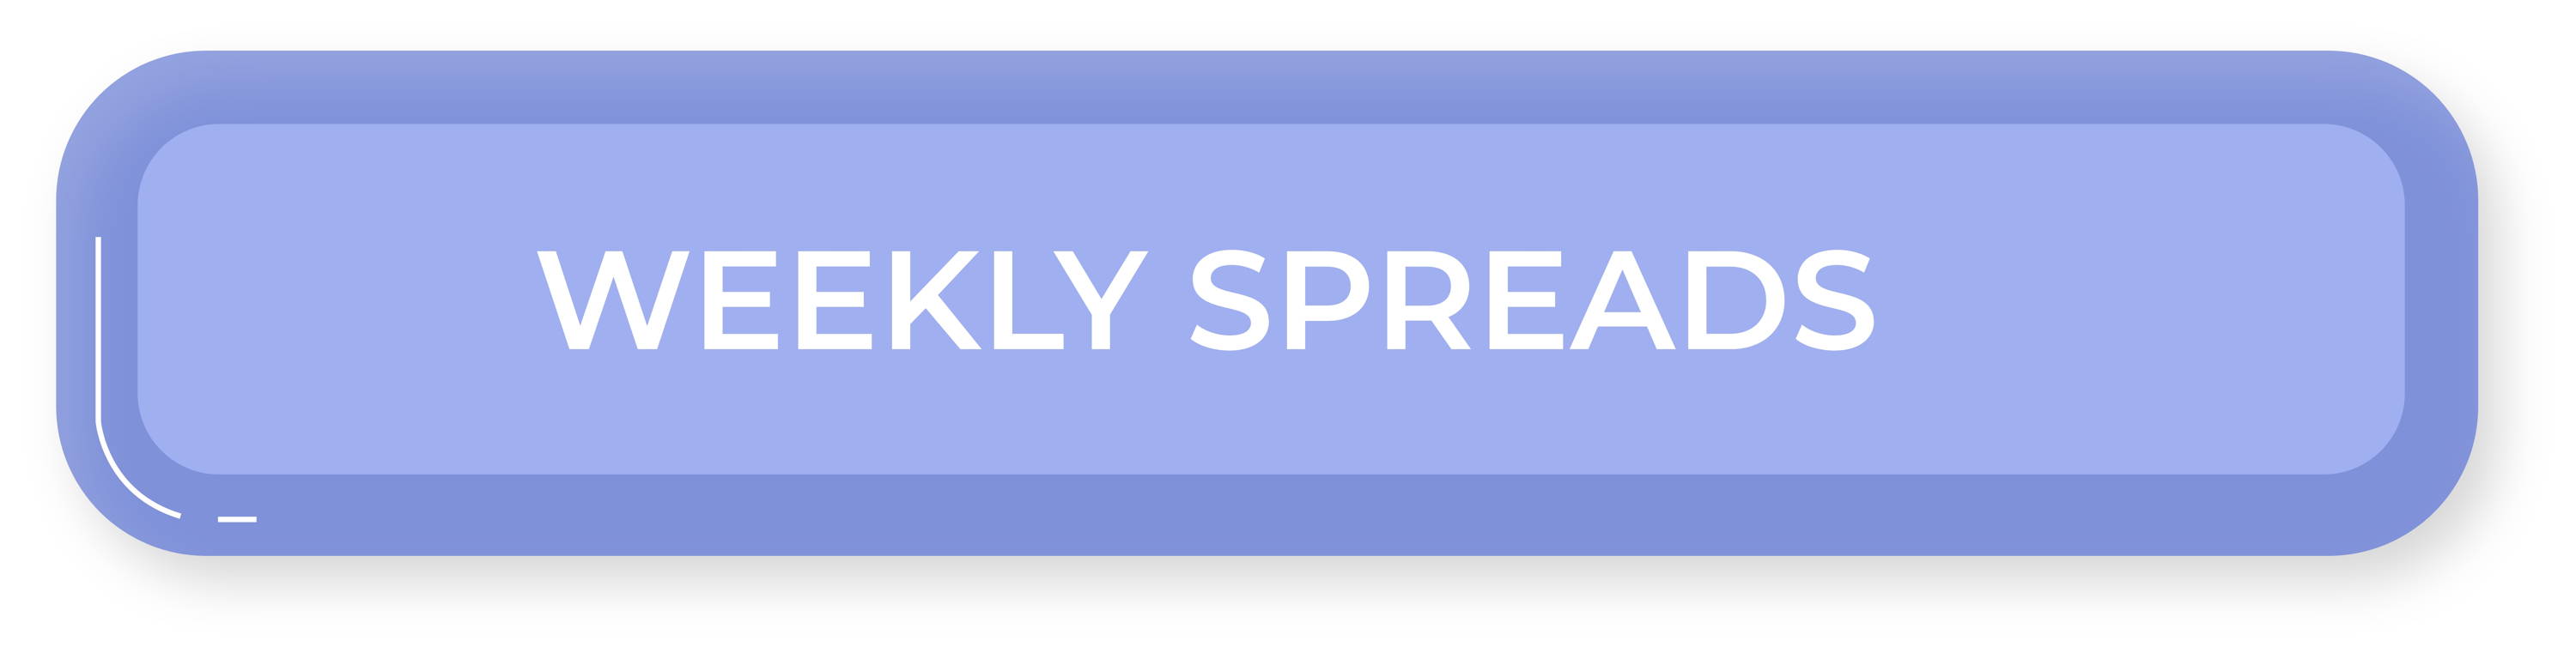 browse by weekly spreads 